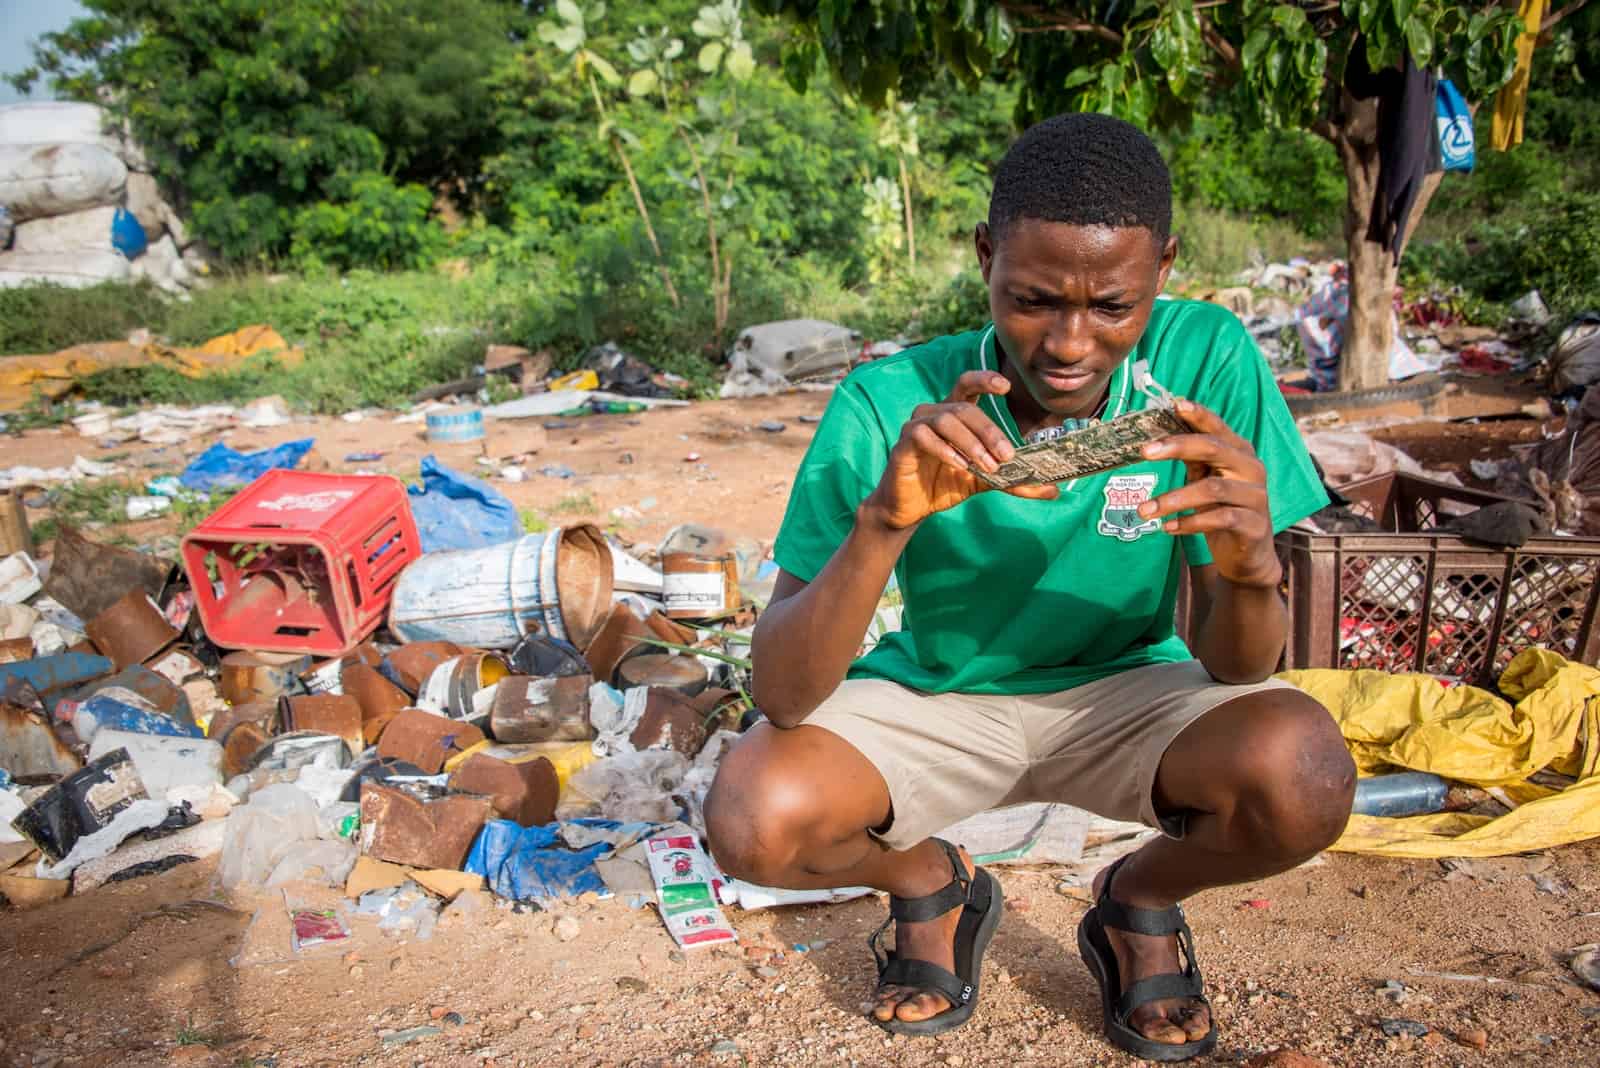 A young man squats surrounded by garbage, looking at a circuit board.